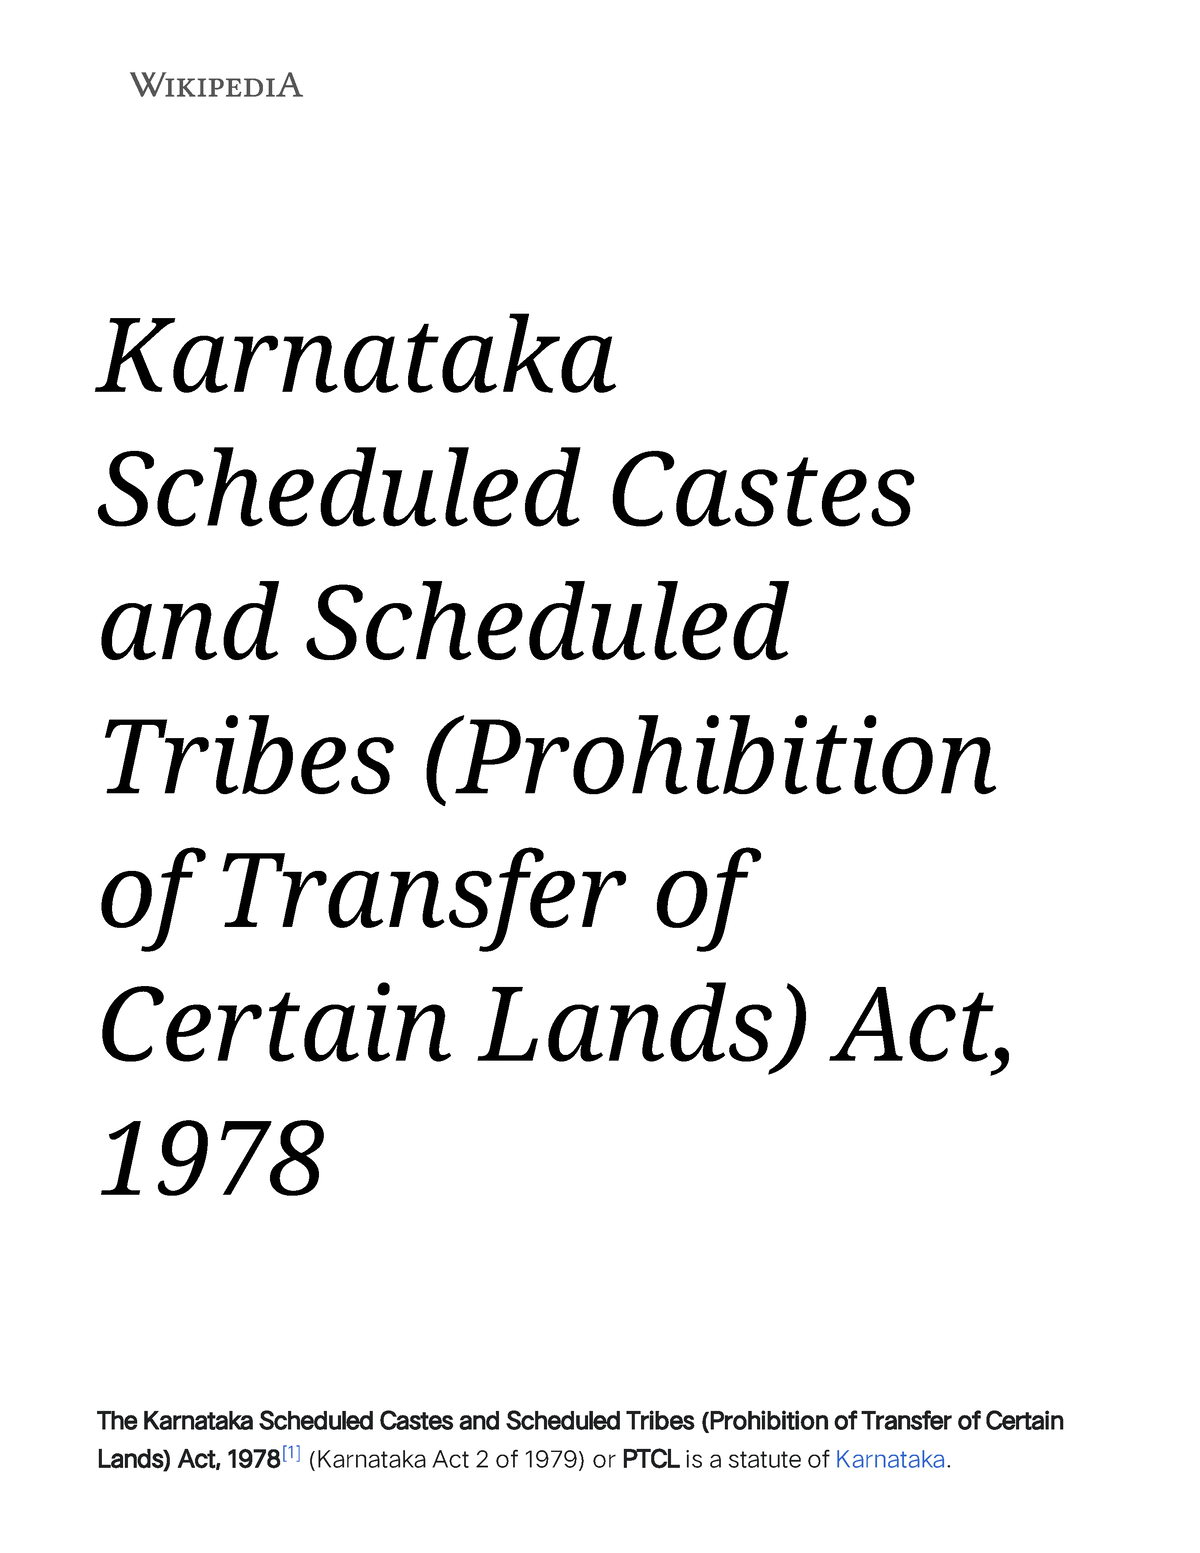 Scheduled Castes and Scheduled Tribes - Wikipedia